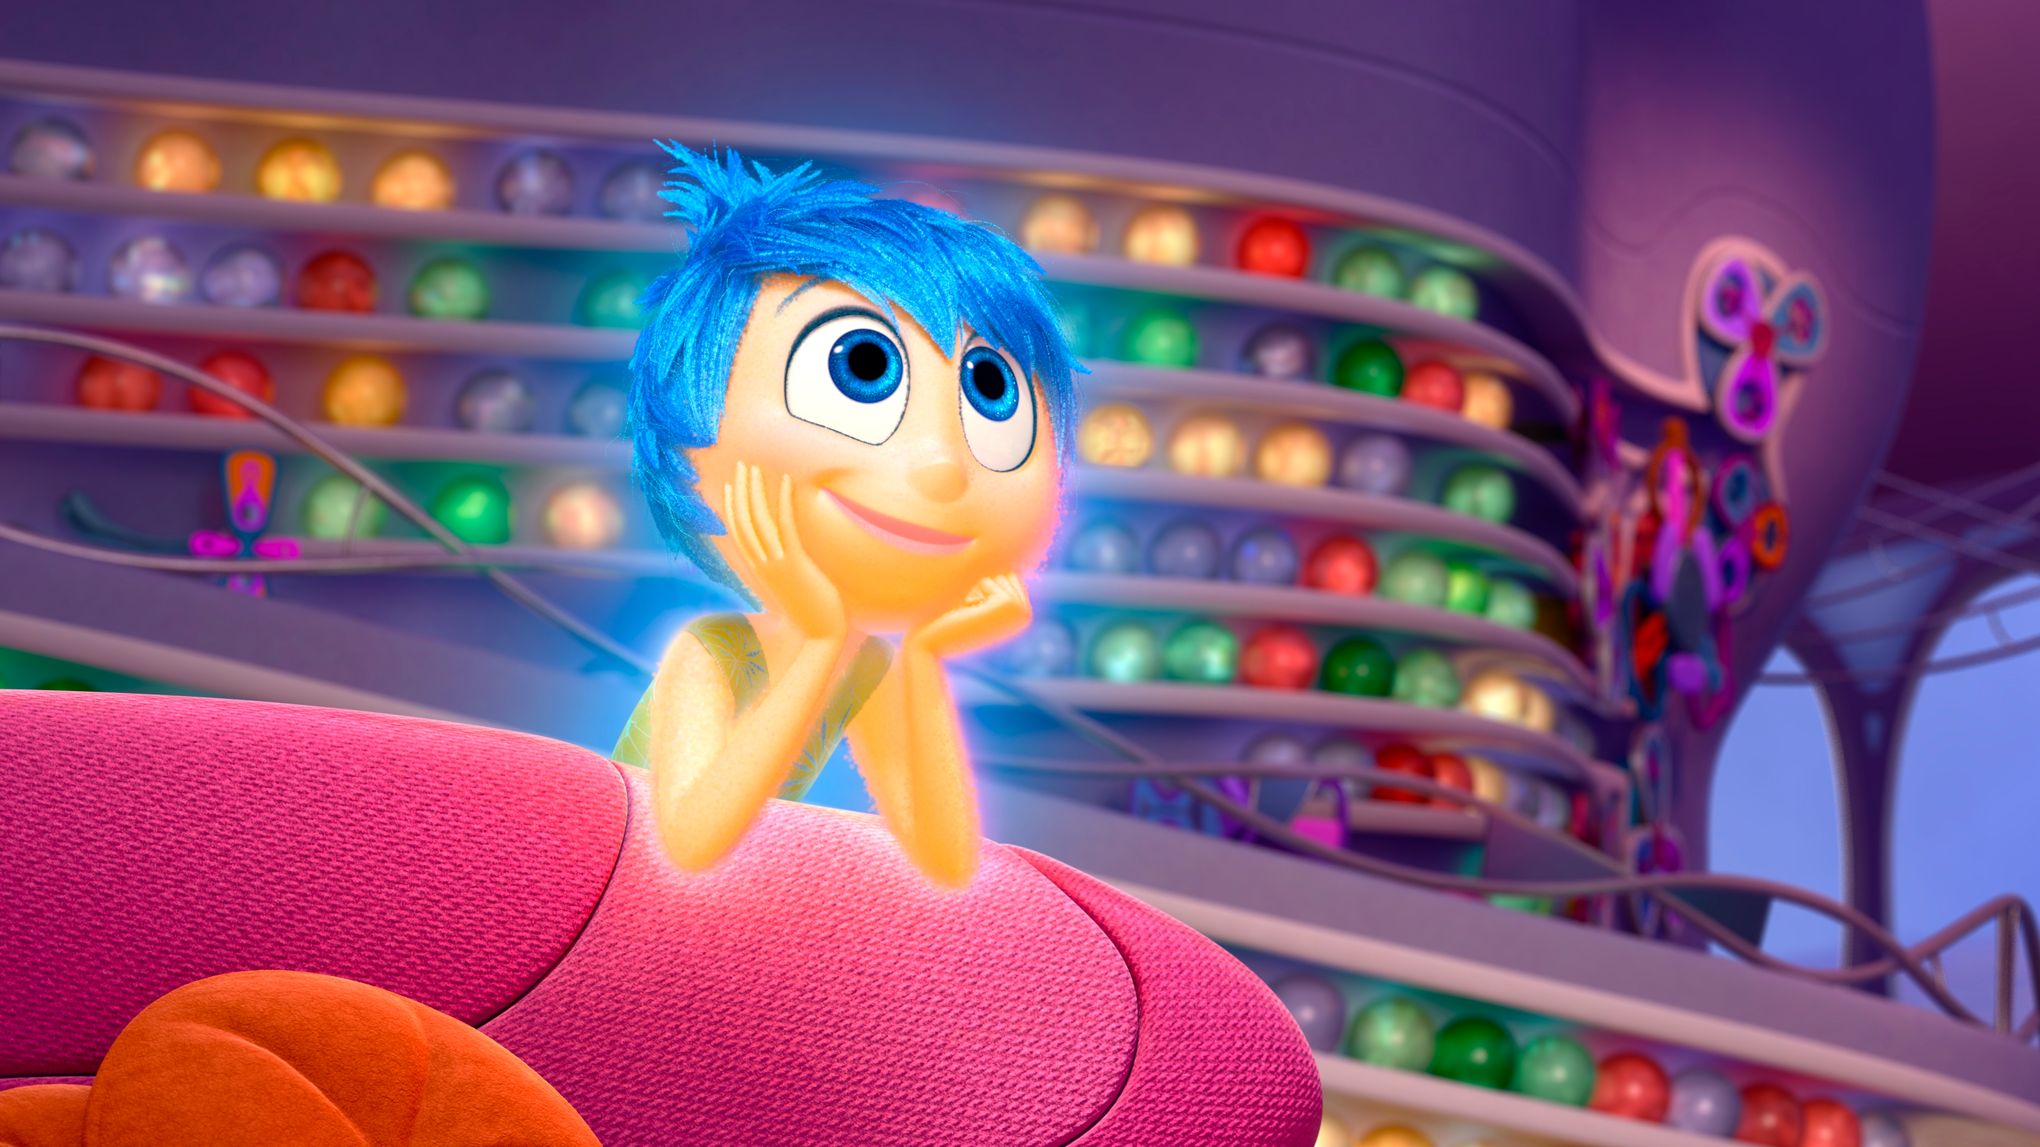 Inside Out: Phyllis Smith had no clue Sadness would be prominent character